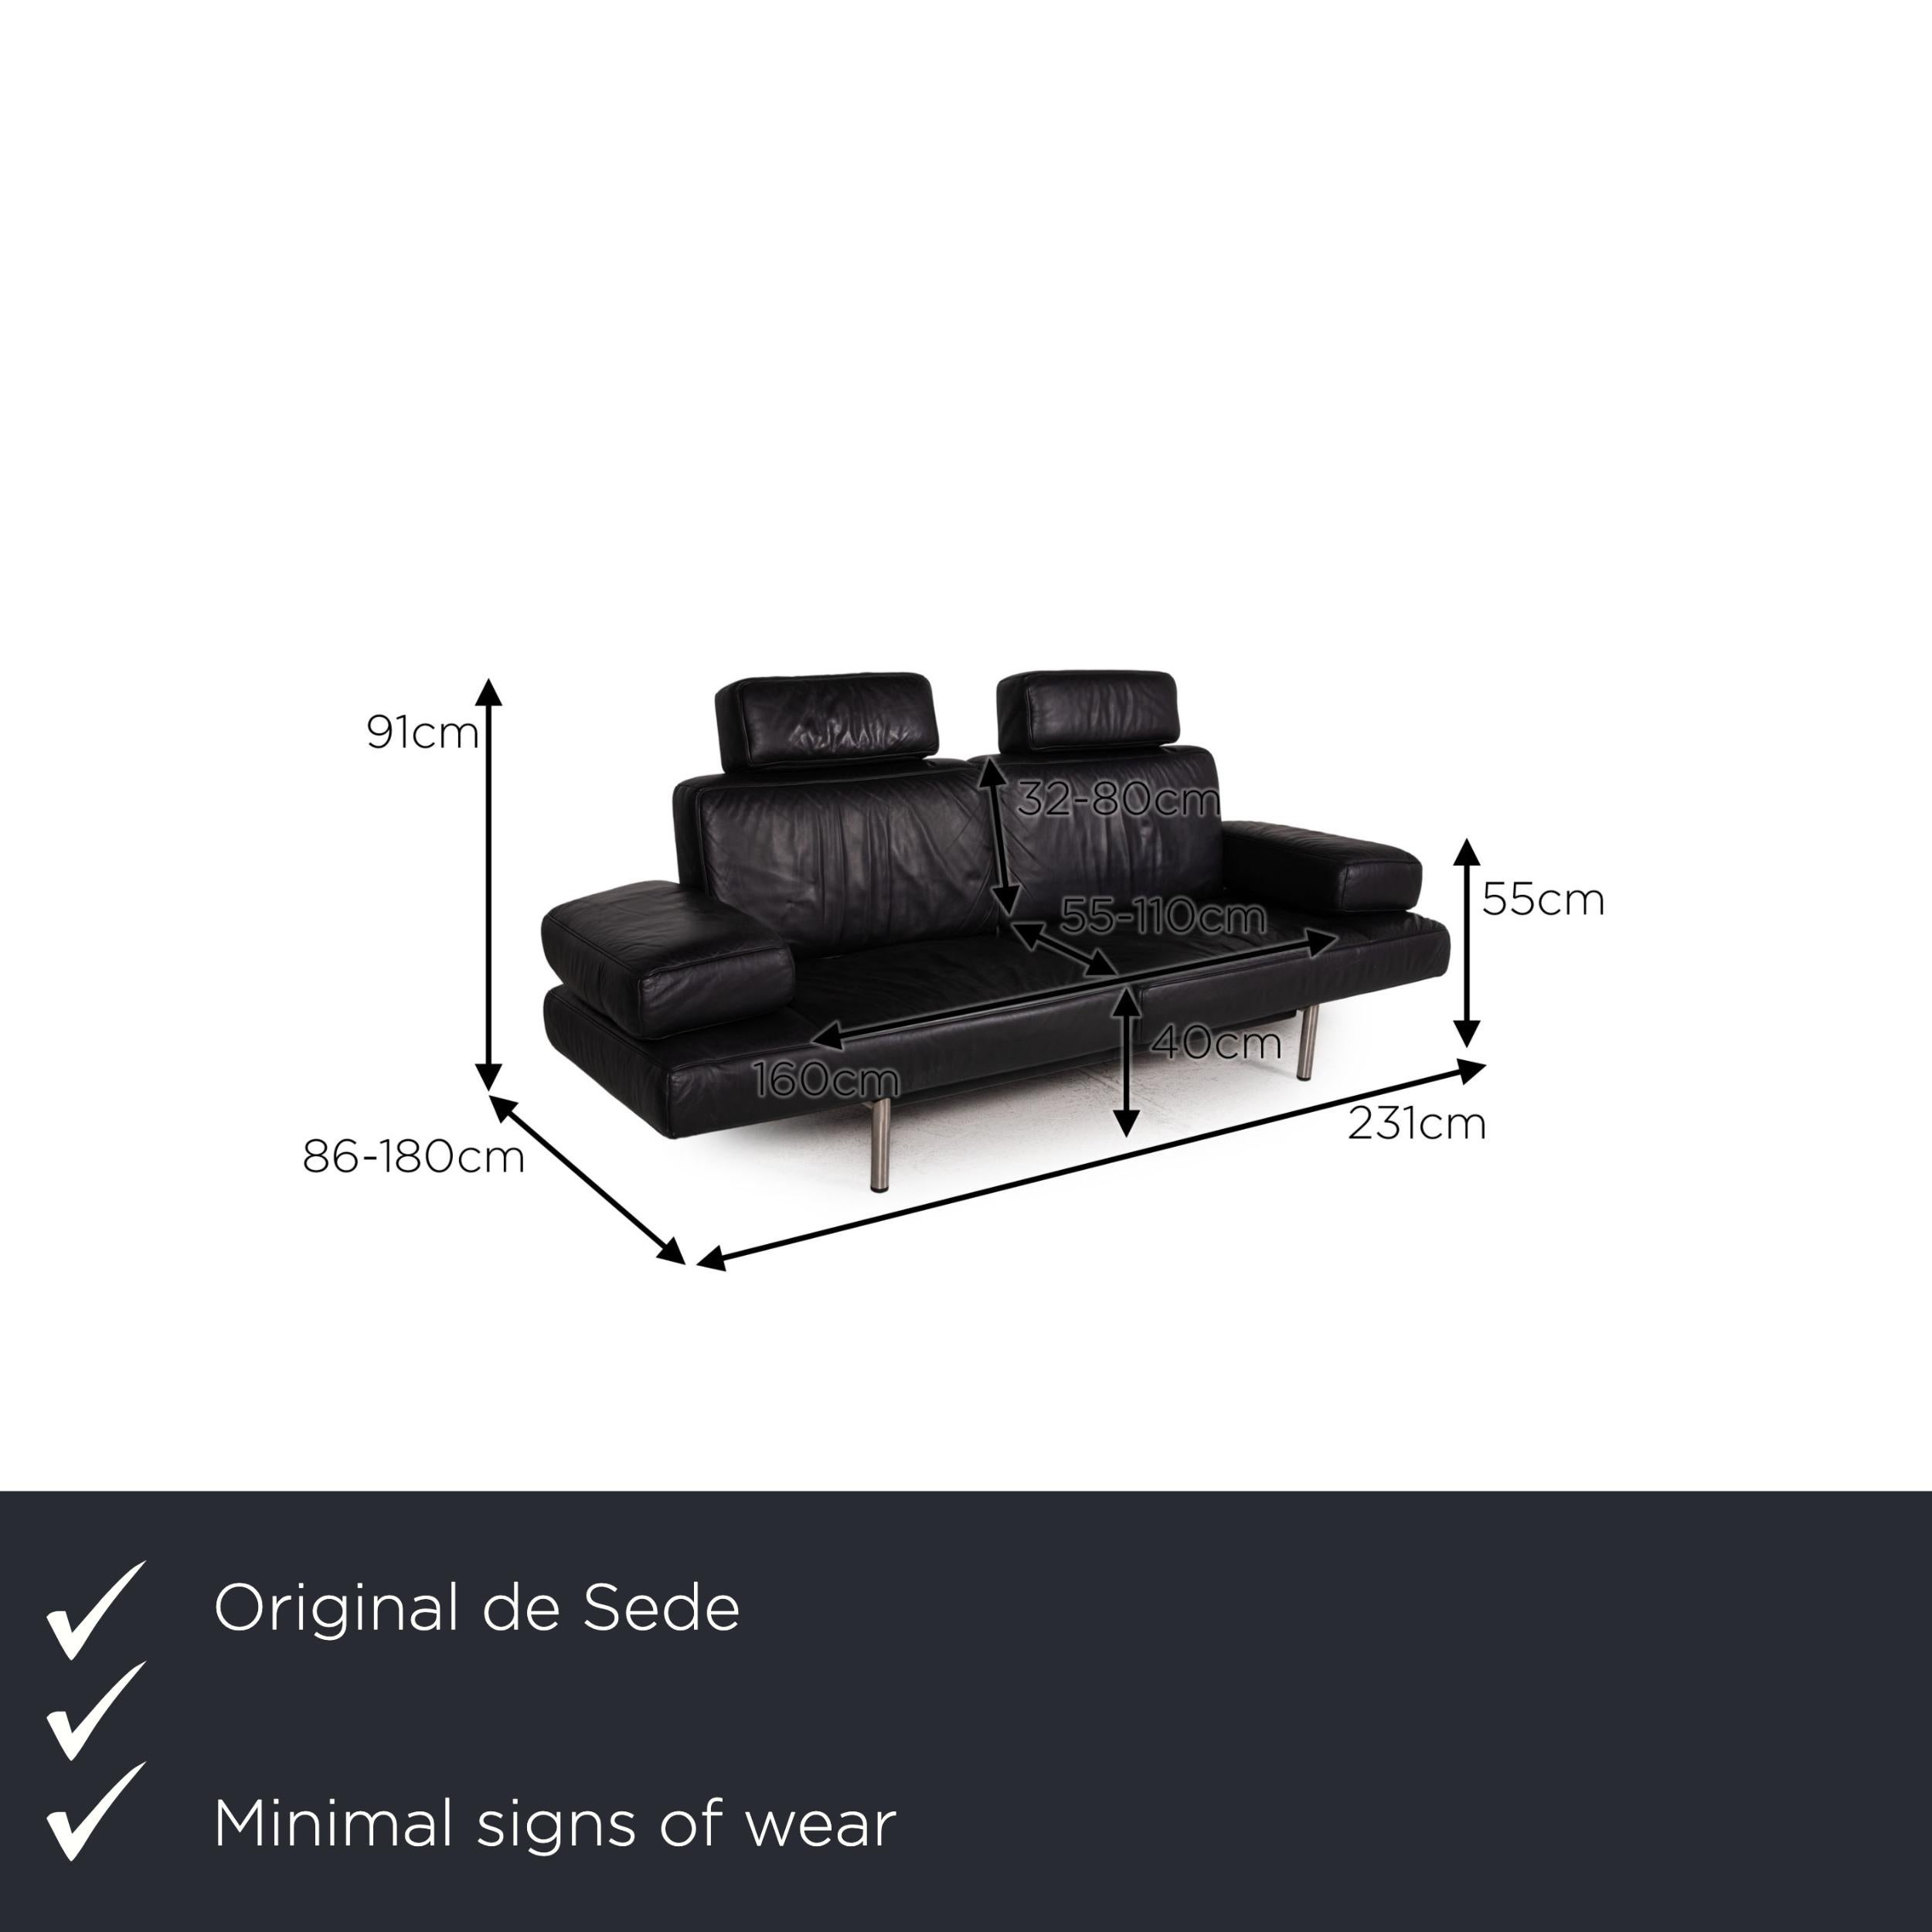 We present to you a de Sede DS 460 leather sofa black three-seater relaxation function couch.

Product measurements in centimeters:

Depth: 86
Width: 231
Height: 91
Seat height: 40
Rest height: 55
Seat depth: 55
Seat width: 160
Back